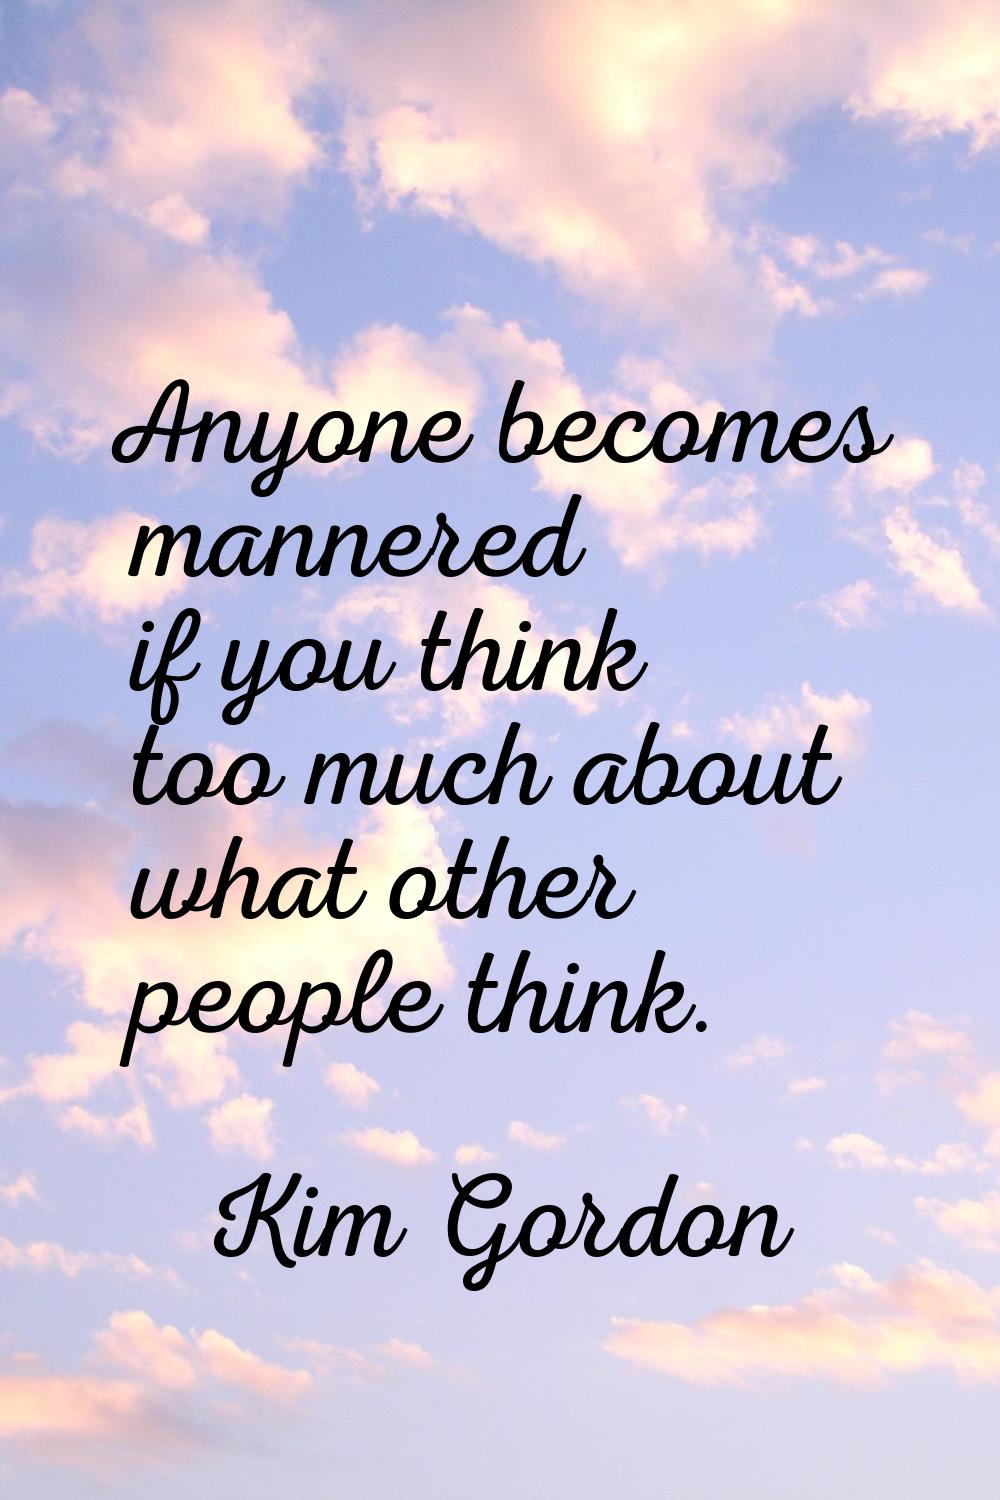 Anyone becomes mannered if you think too much about what other people think.